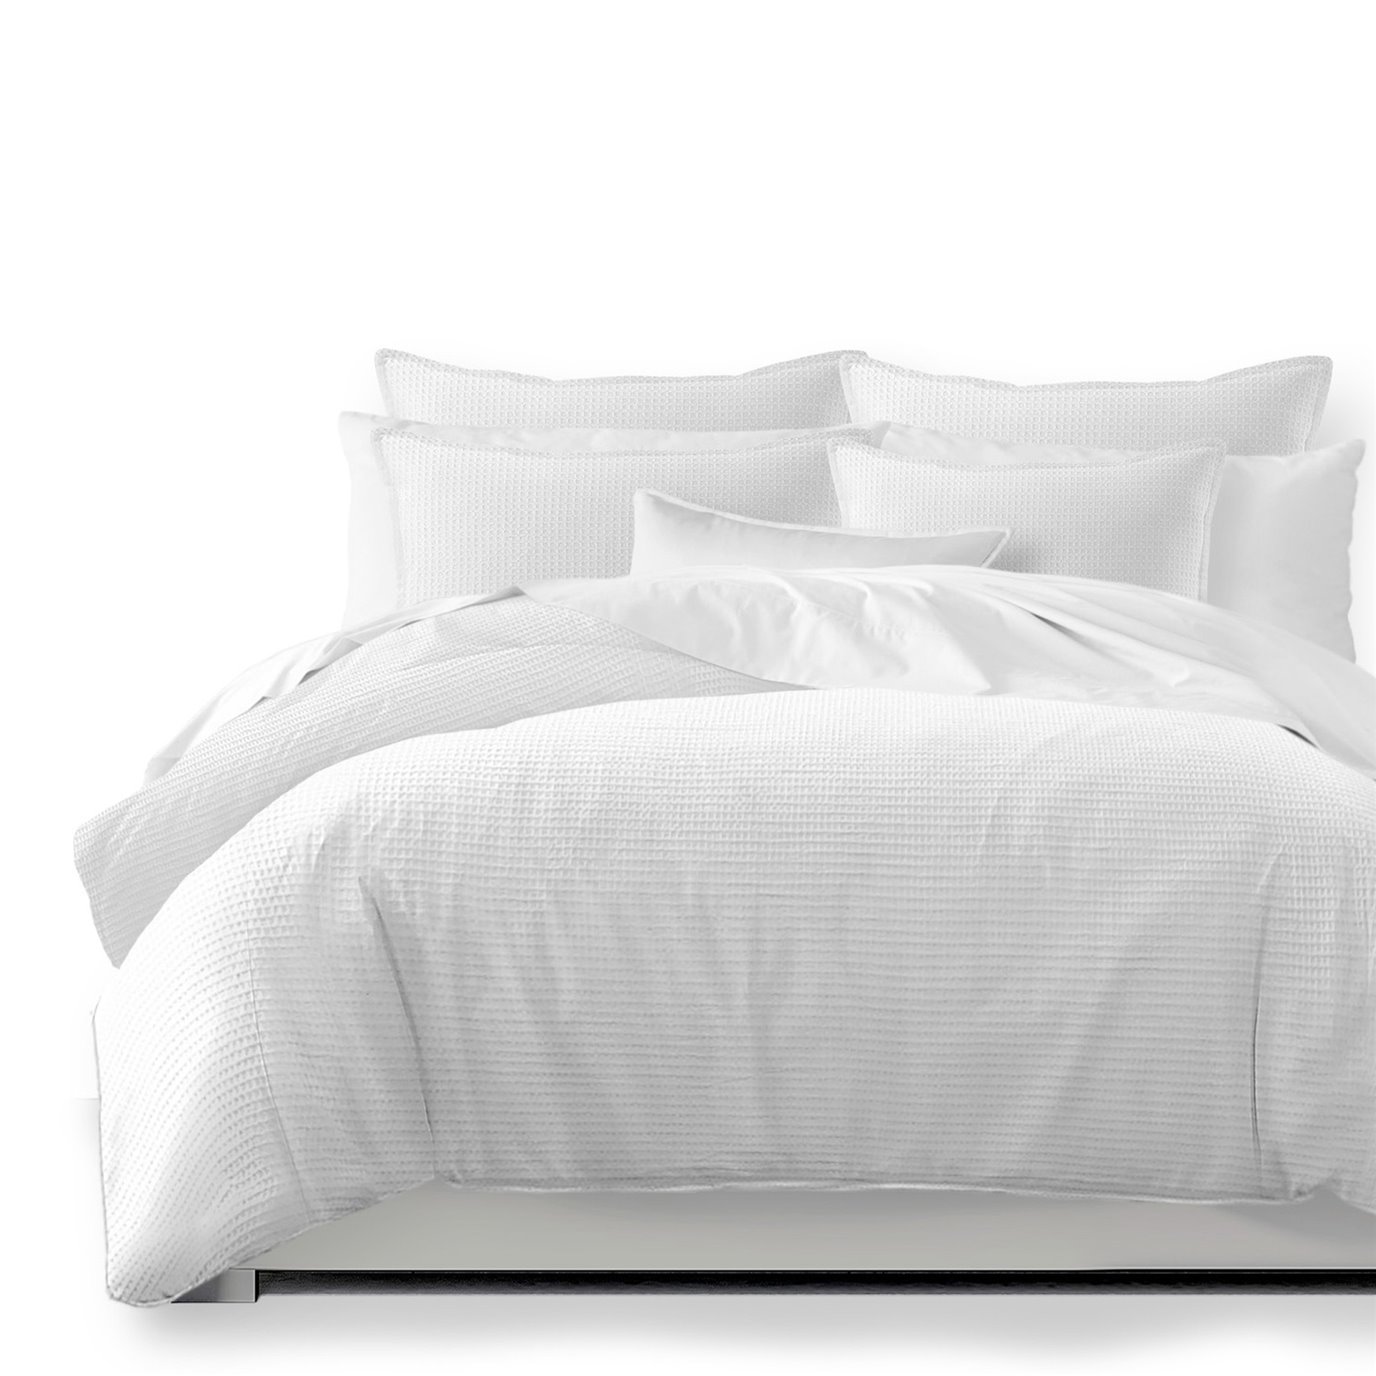 Classic Waffle White Comforter and Pillow Sham(s) Set - Size Queen